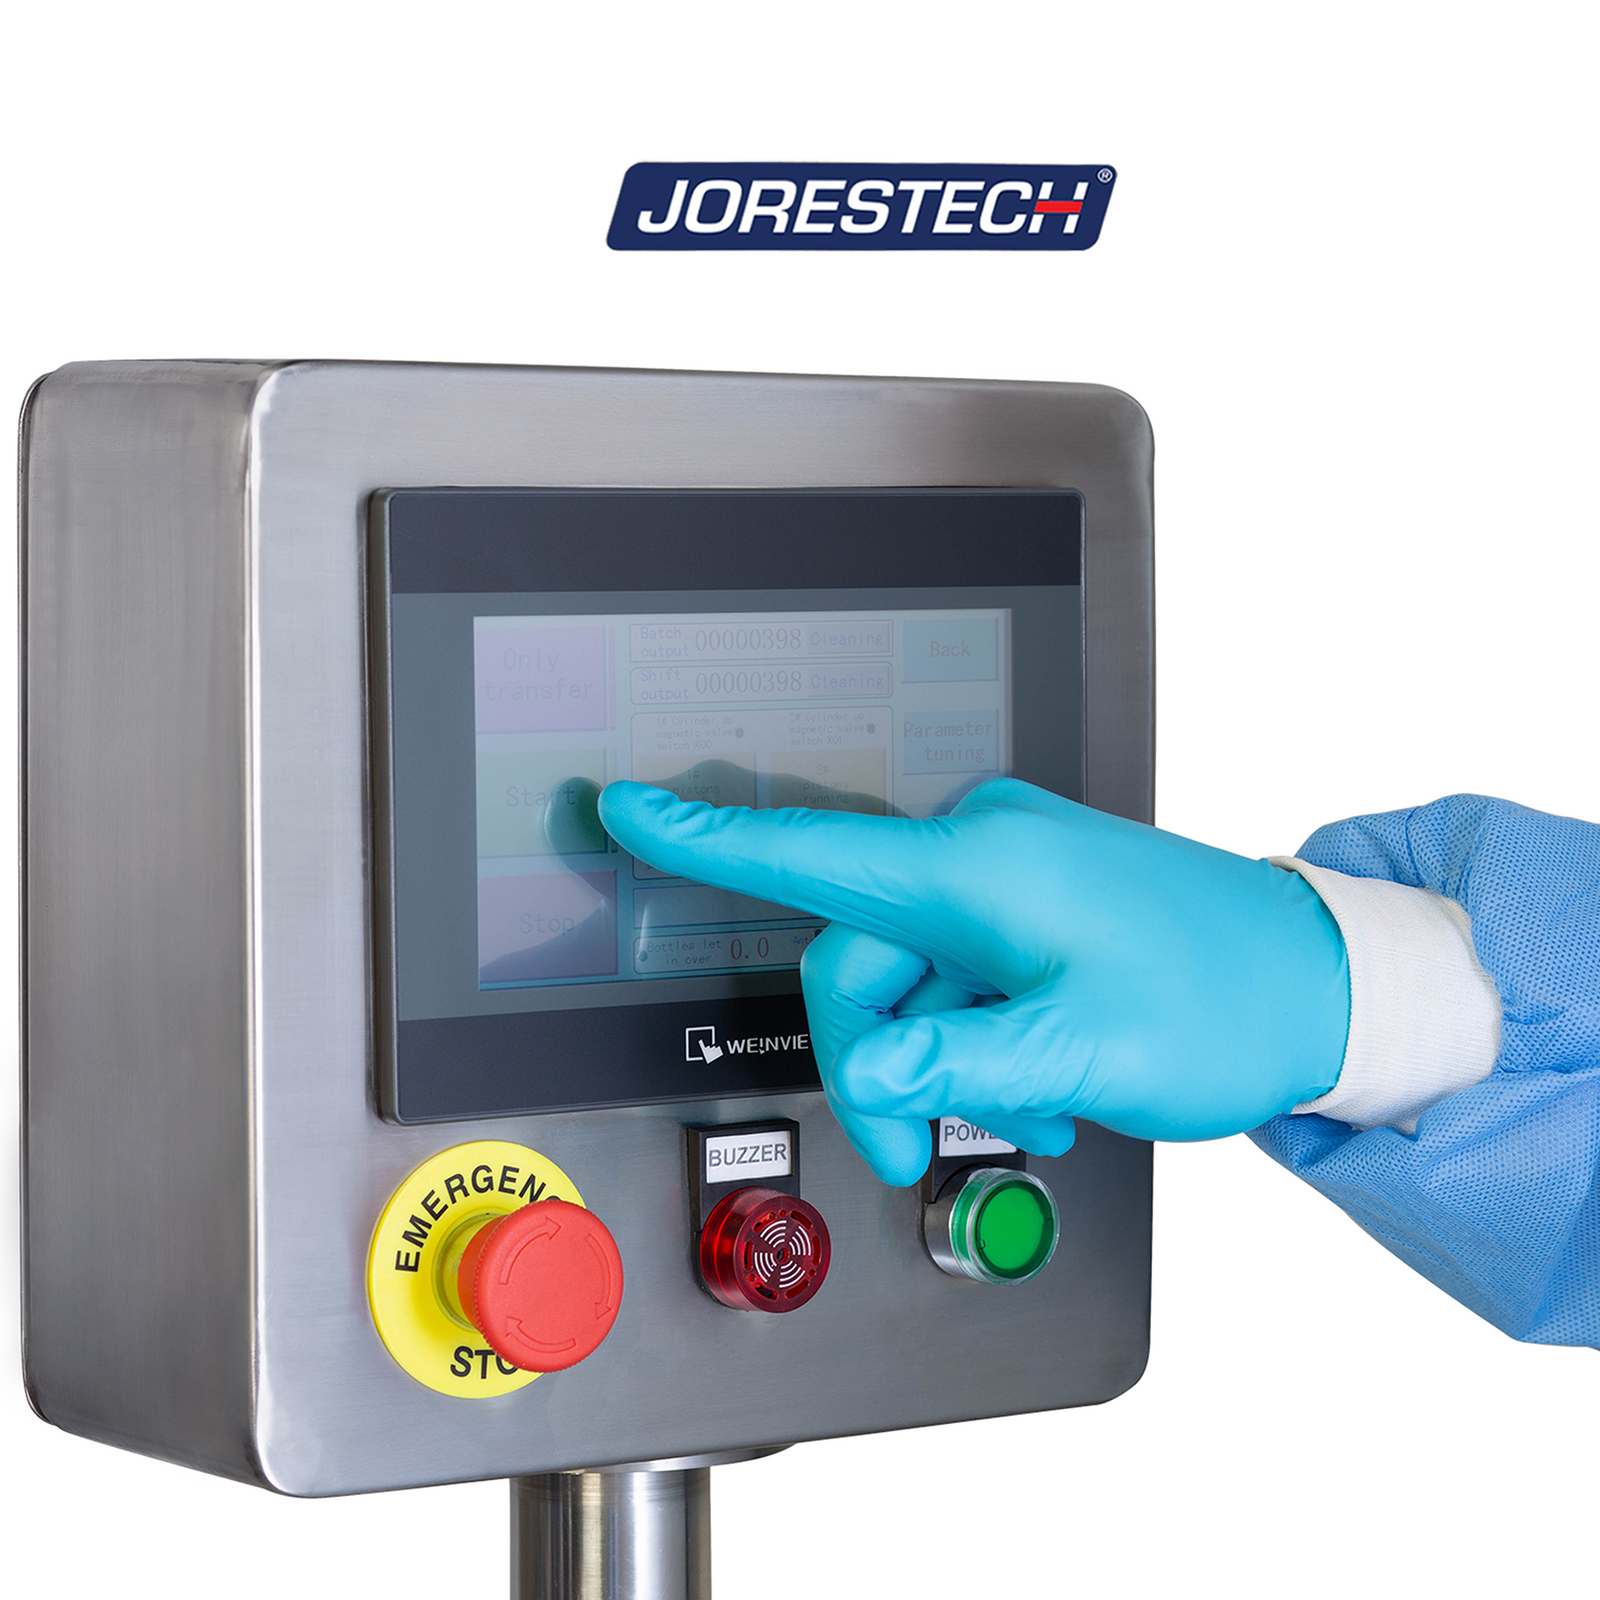 The hand of a worker with nitrile gloves setting the machine on the user friendly digital control panel  of the high viscosity piston filler